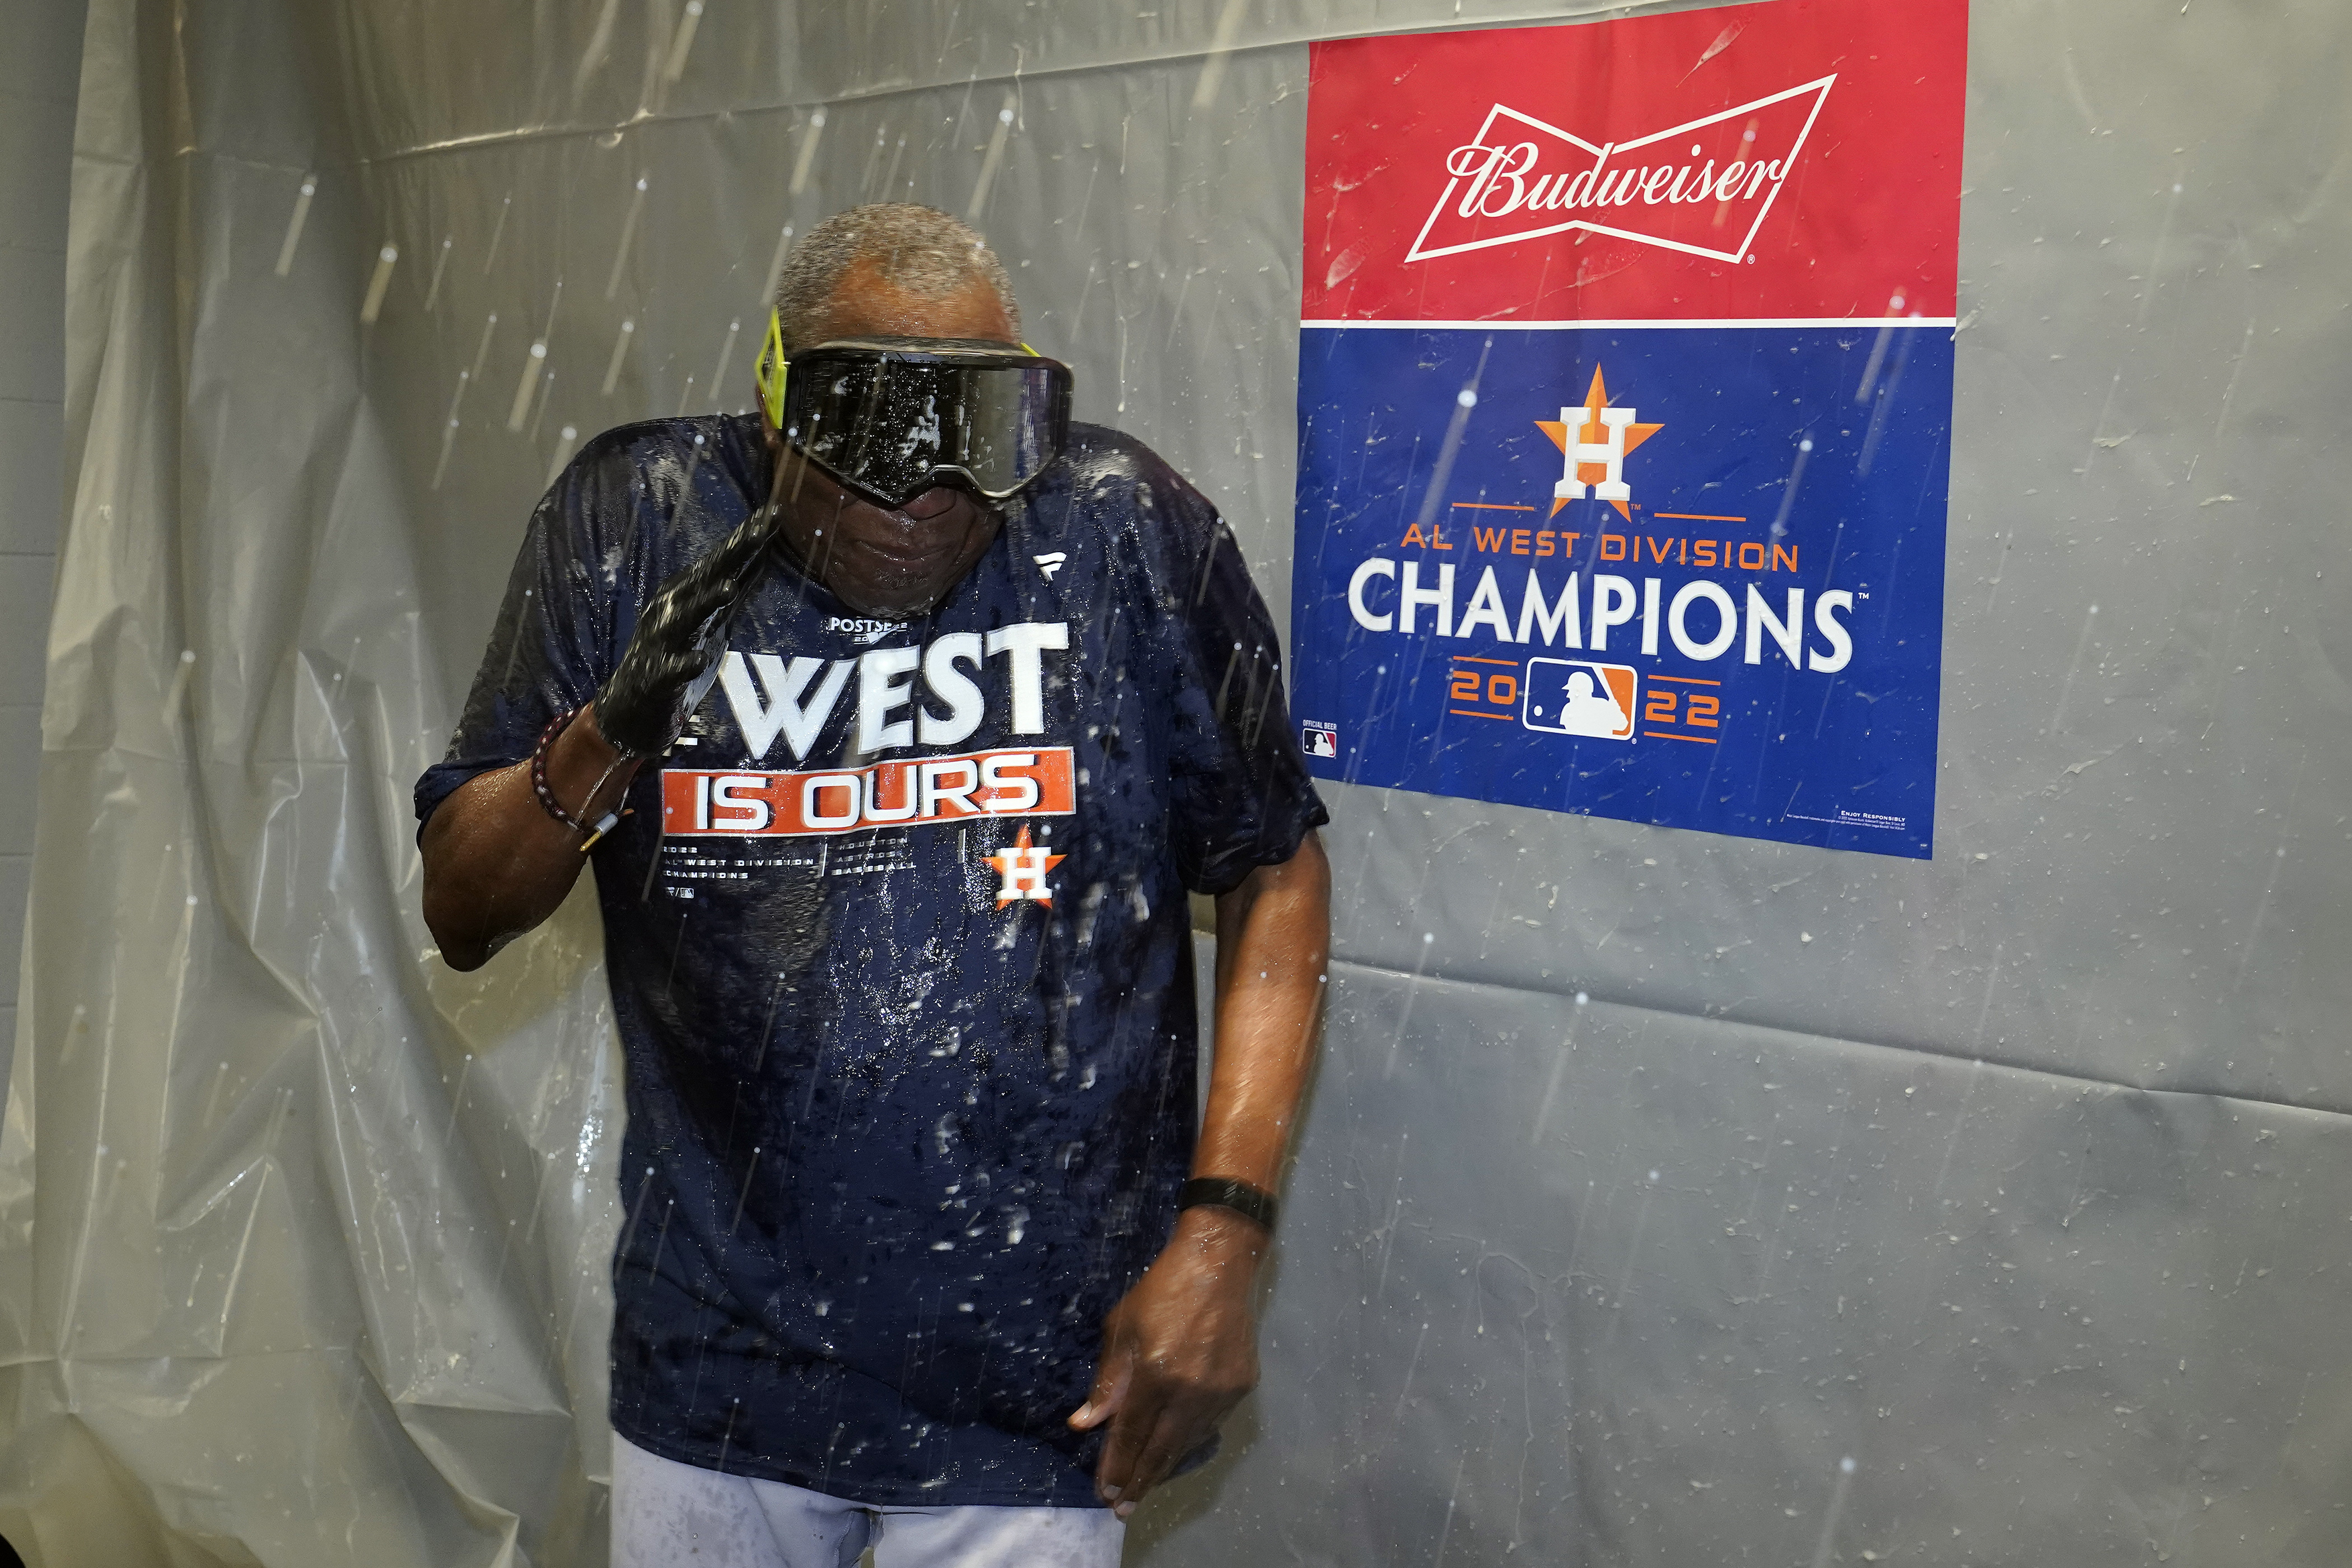 Defending their title! The Astros CLINCH AL West and head BACK to